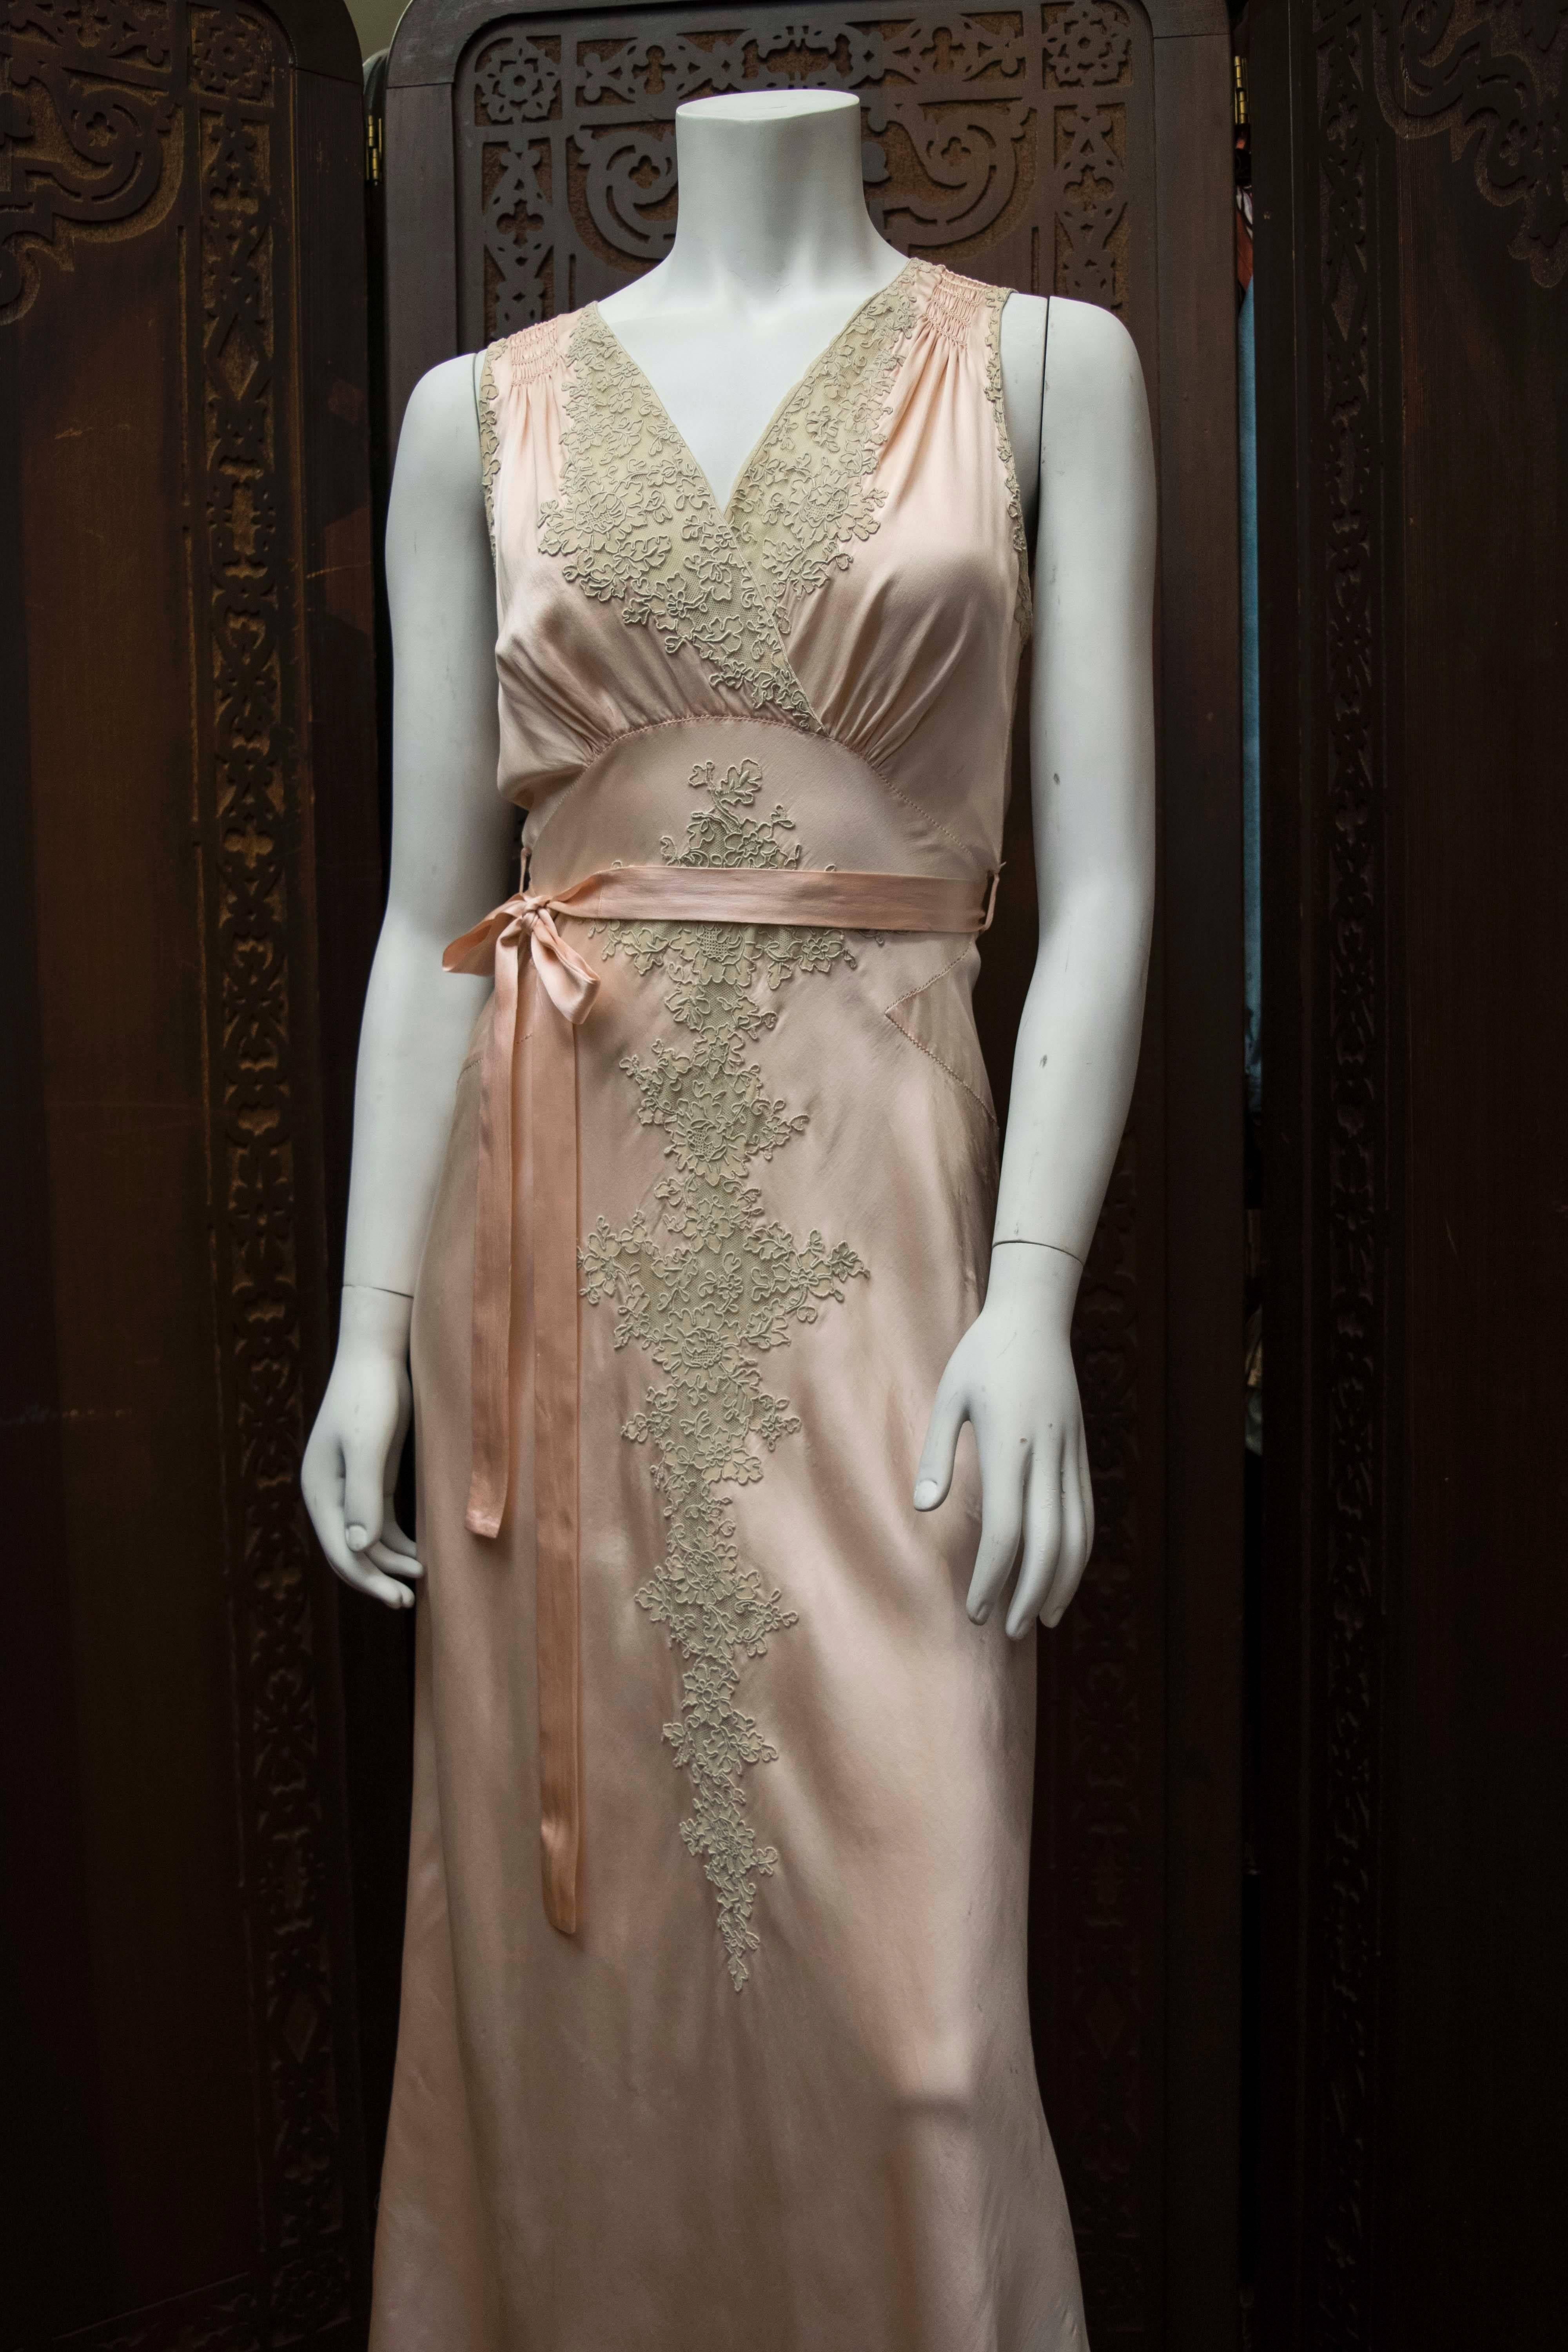 Women's 1930s Two Piece Loungewear: Gown and Robe